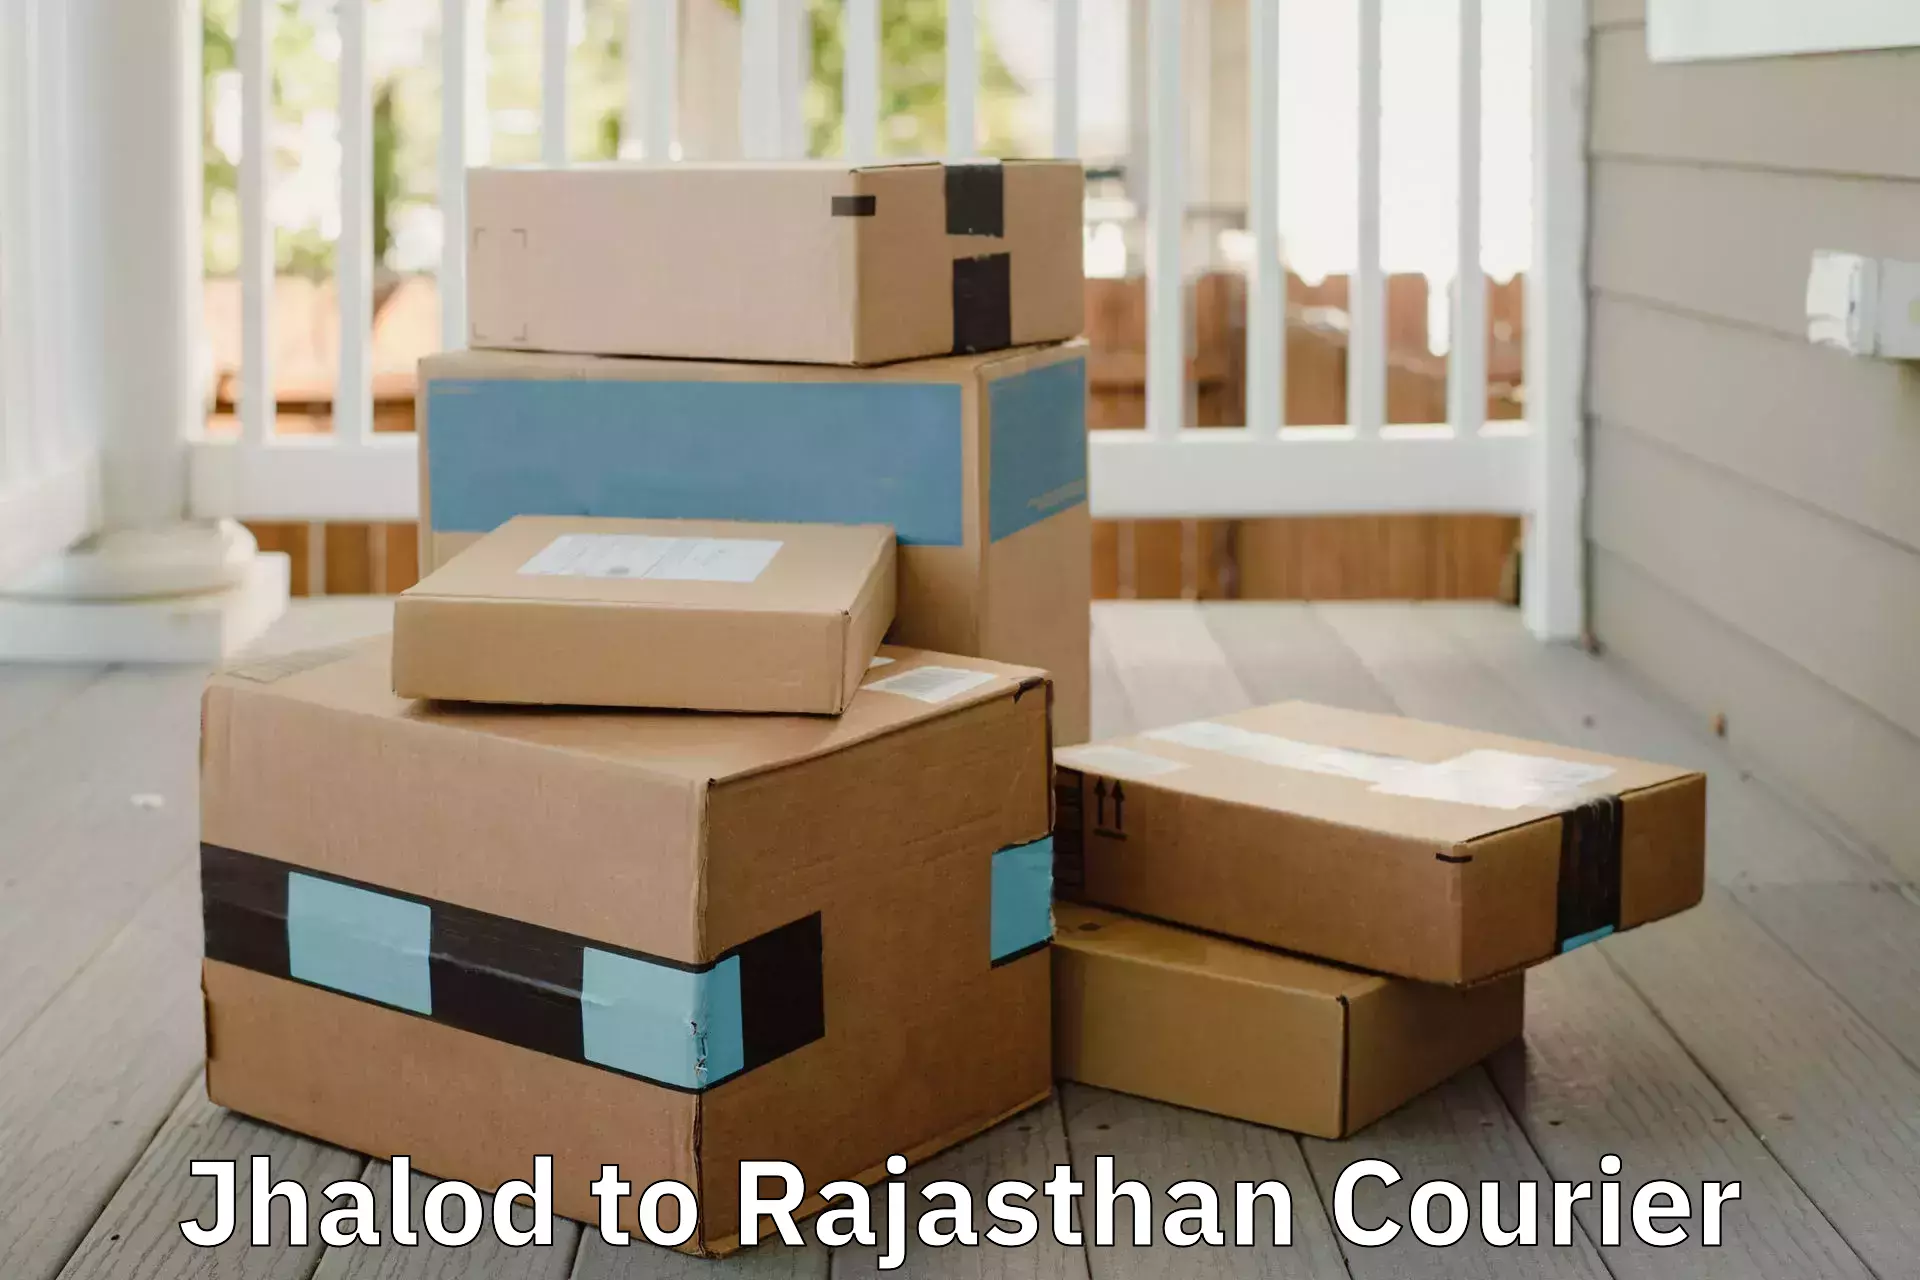 Trusted household movers Jhalod to Fatehpur Sikar